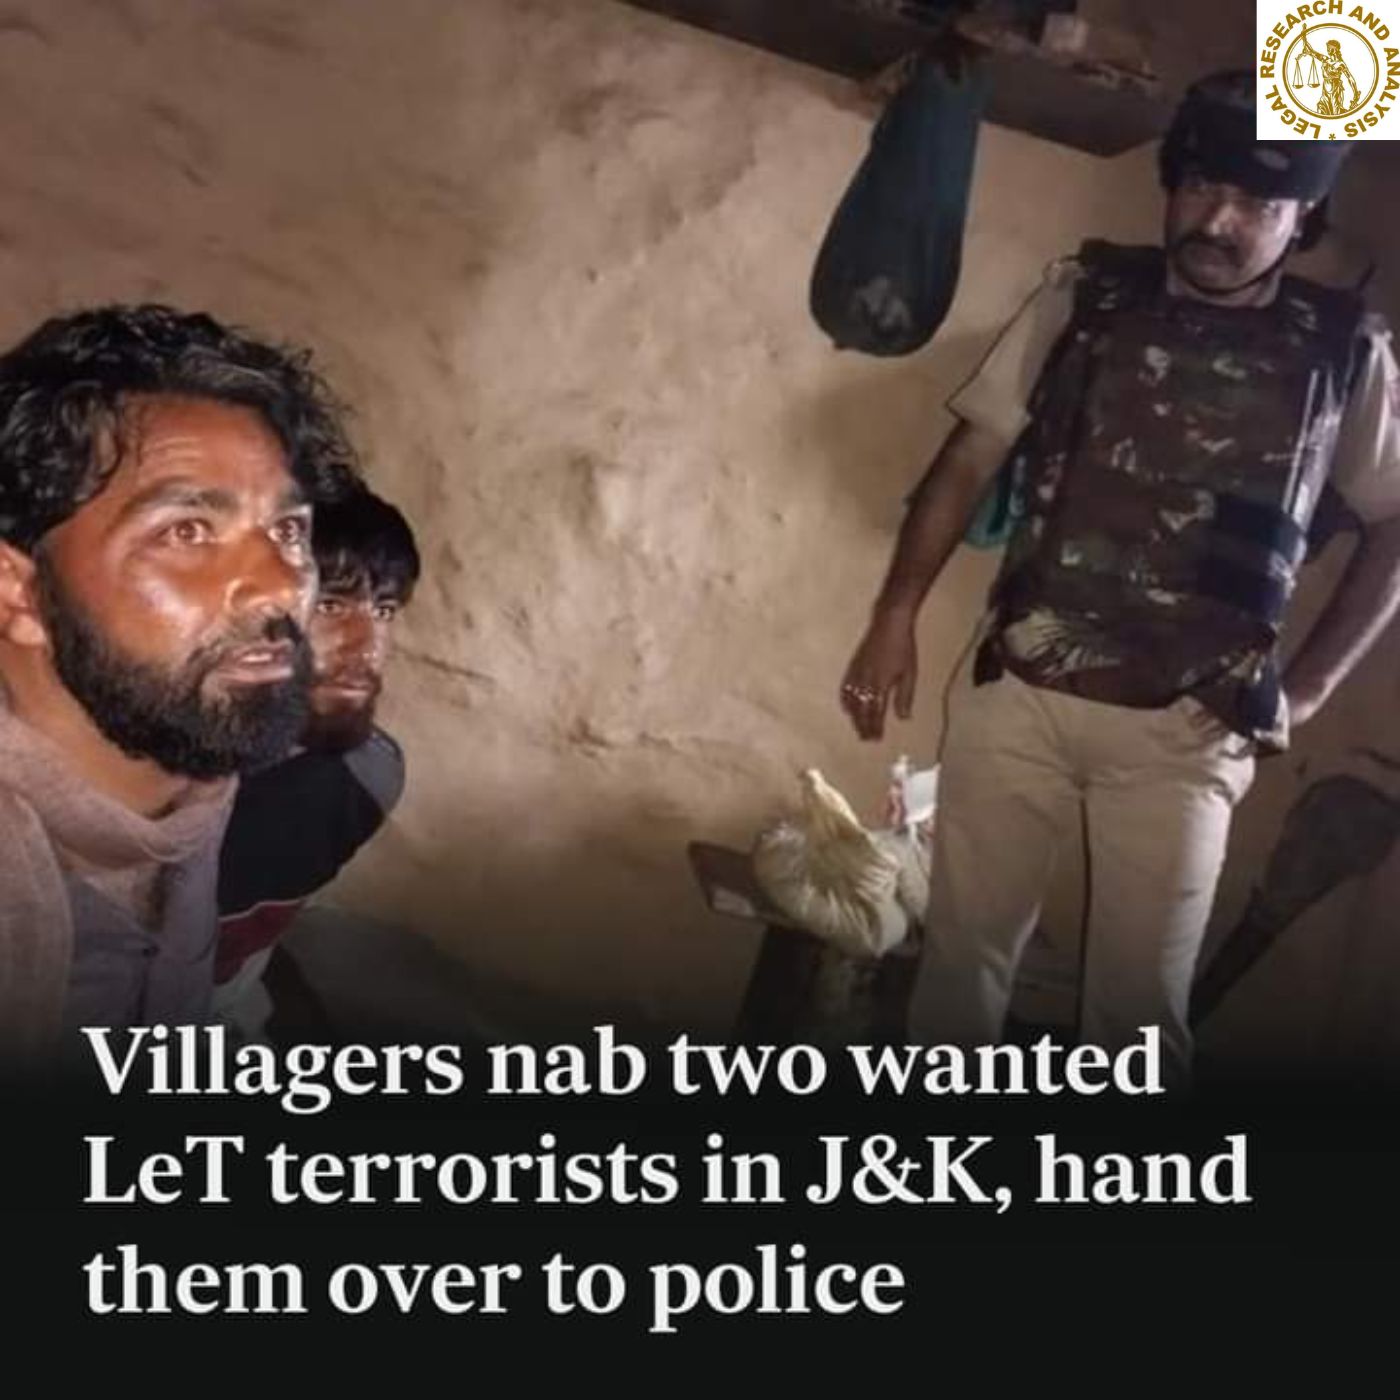 Villagers nab two wanted LeT terrorists in J&K, and hand them over to police.